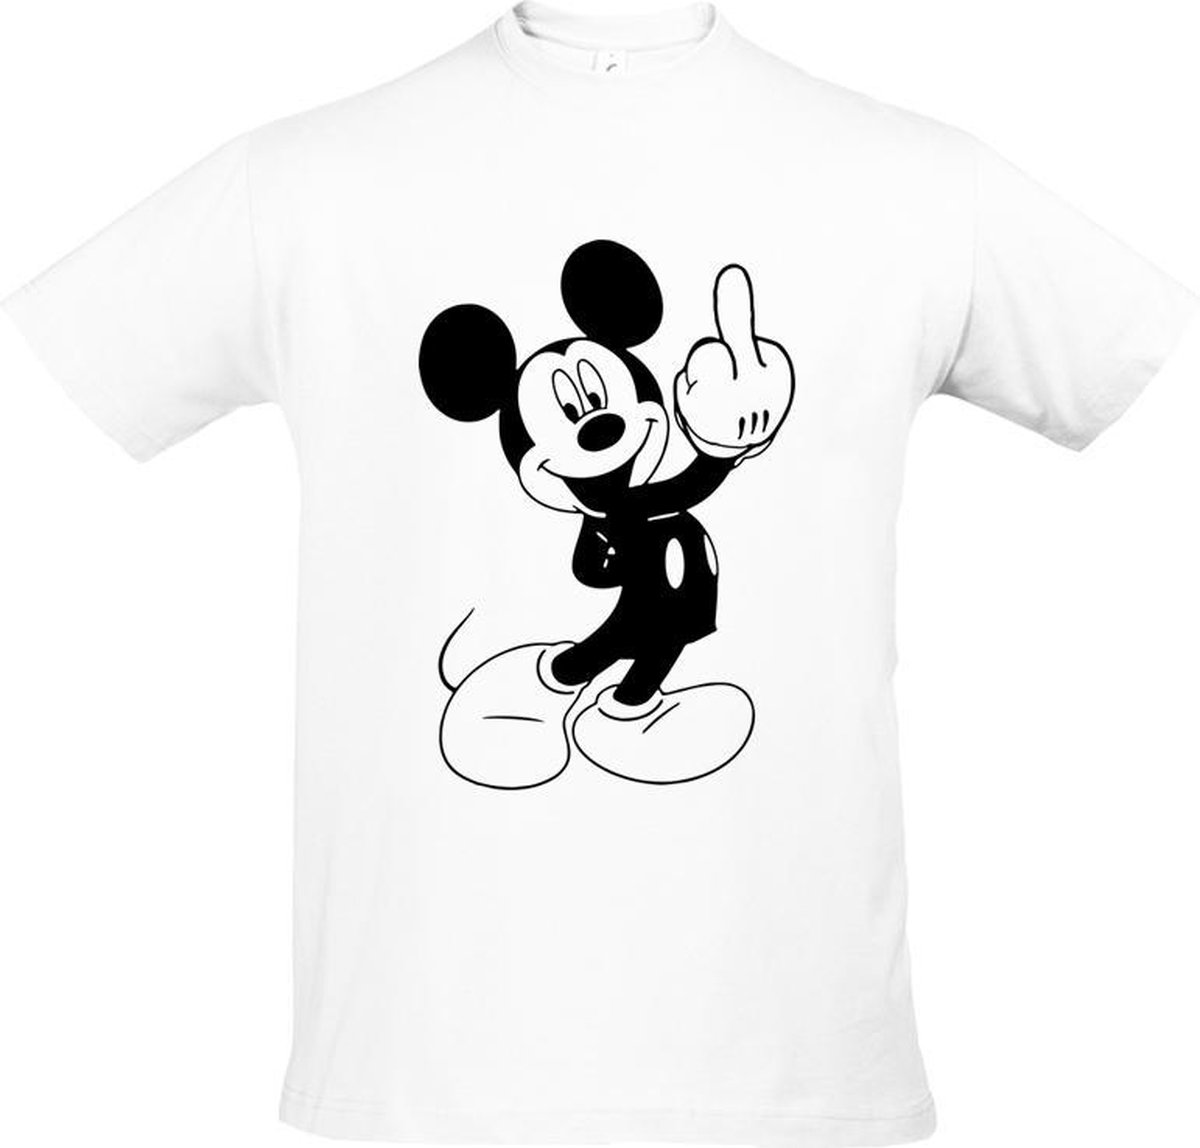 Bc Mickey Mouse - Fuck You - Disney - Tekenfilm - Vandaal - Minnie Mouse - Weed - Rock On Unisex T-shirt XS